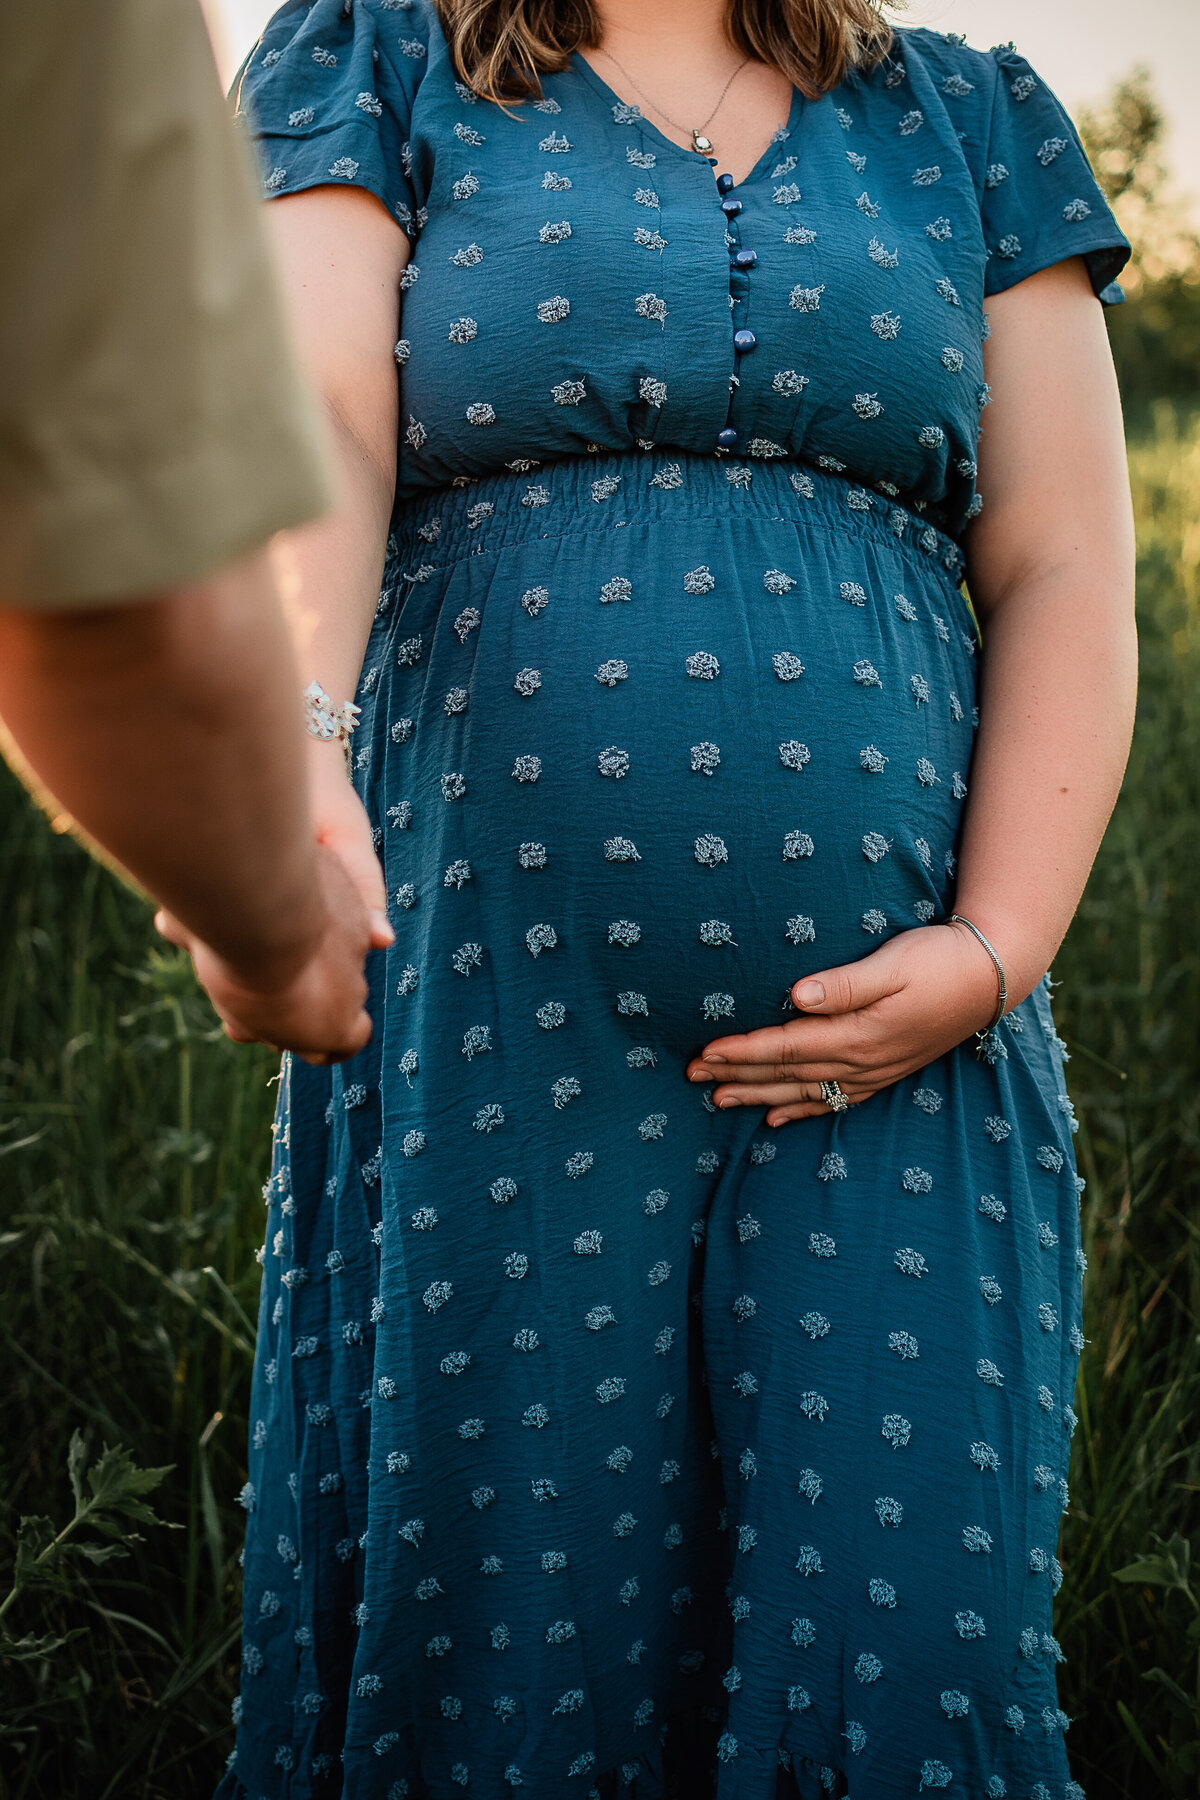 A woman in a blue dress holds her husband's hand and her belly for a close up detail shot.